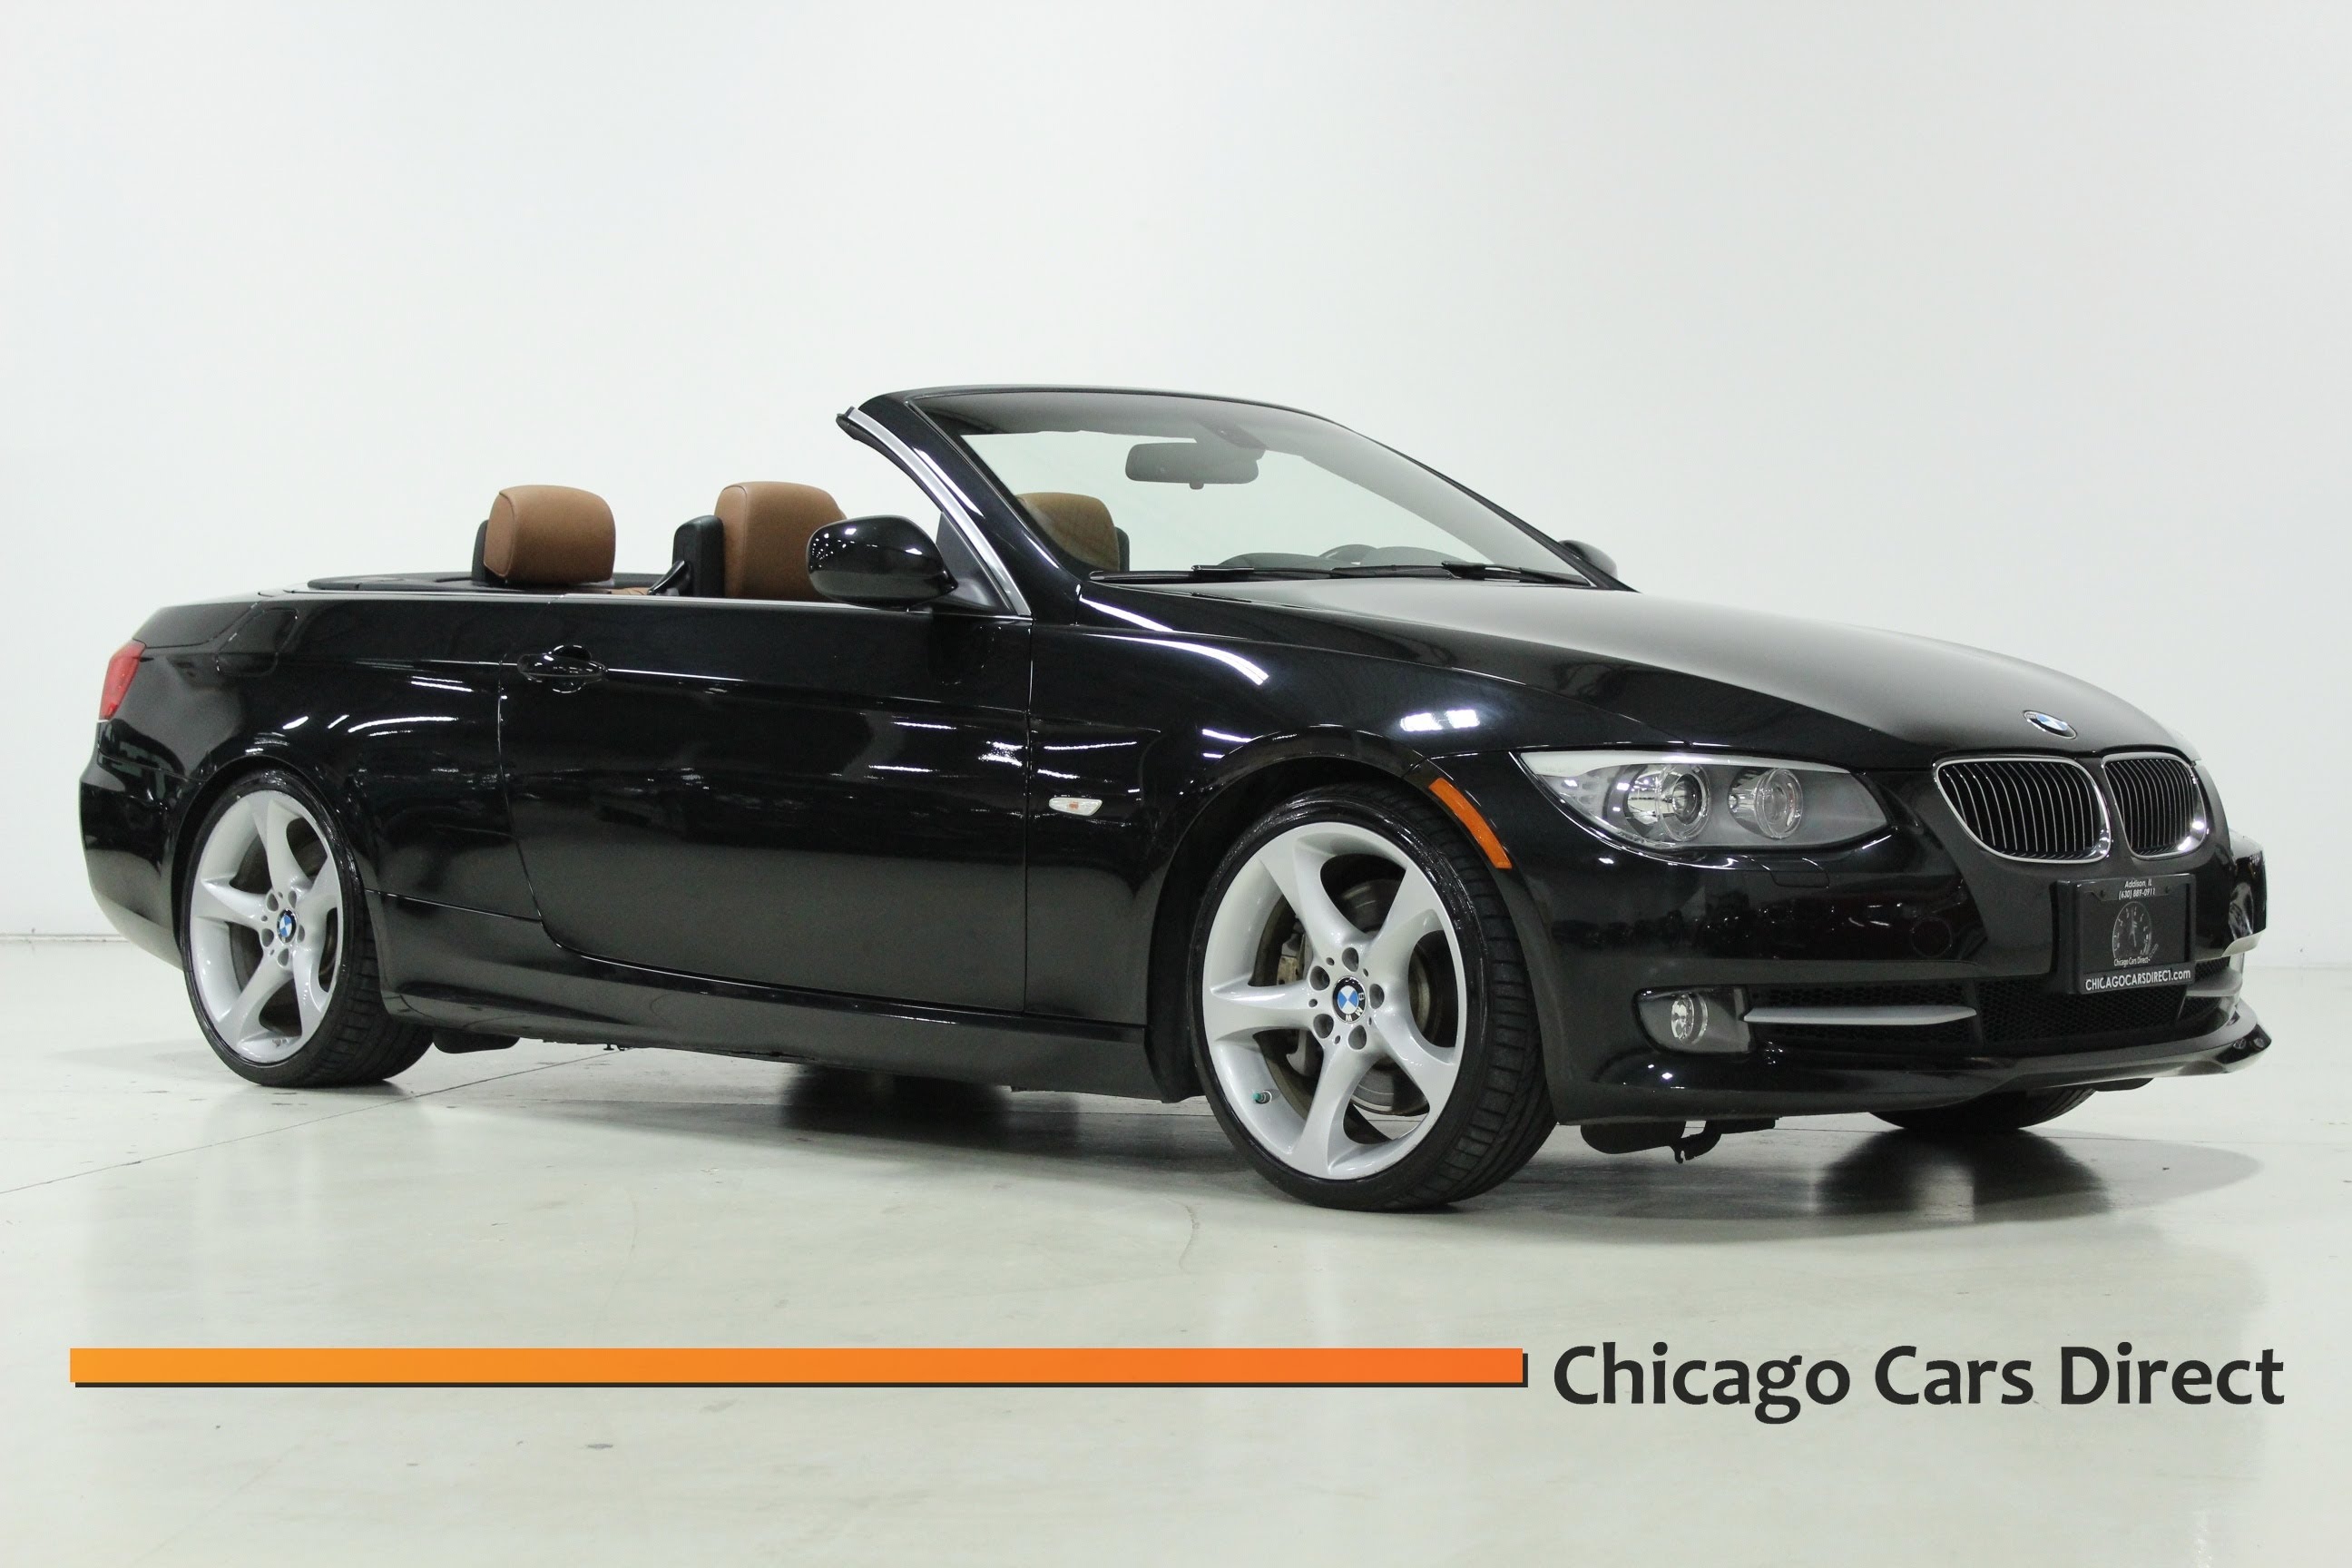 Chicago Cars Direct Presents a 2011 BMW 335i Convertible. Black ...